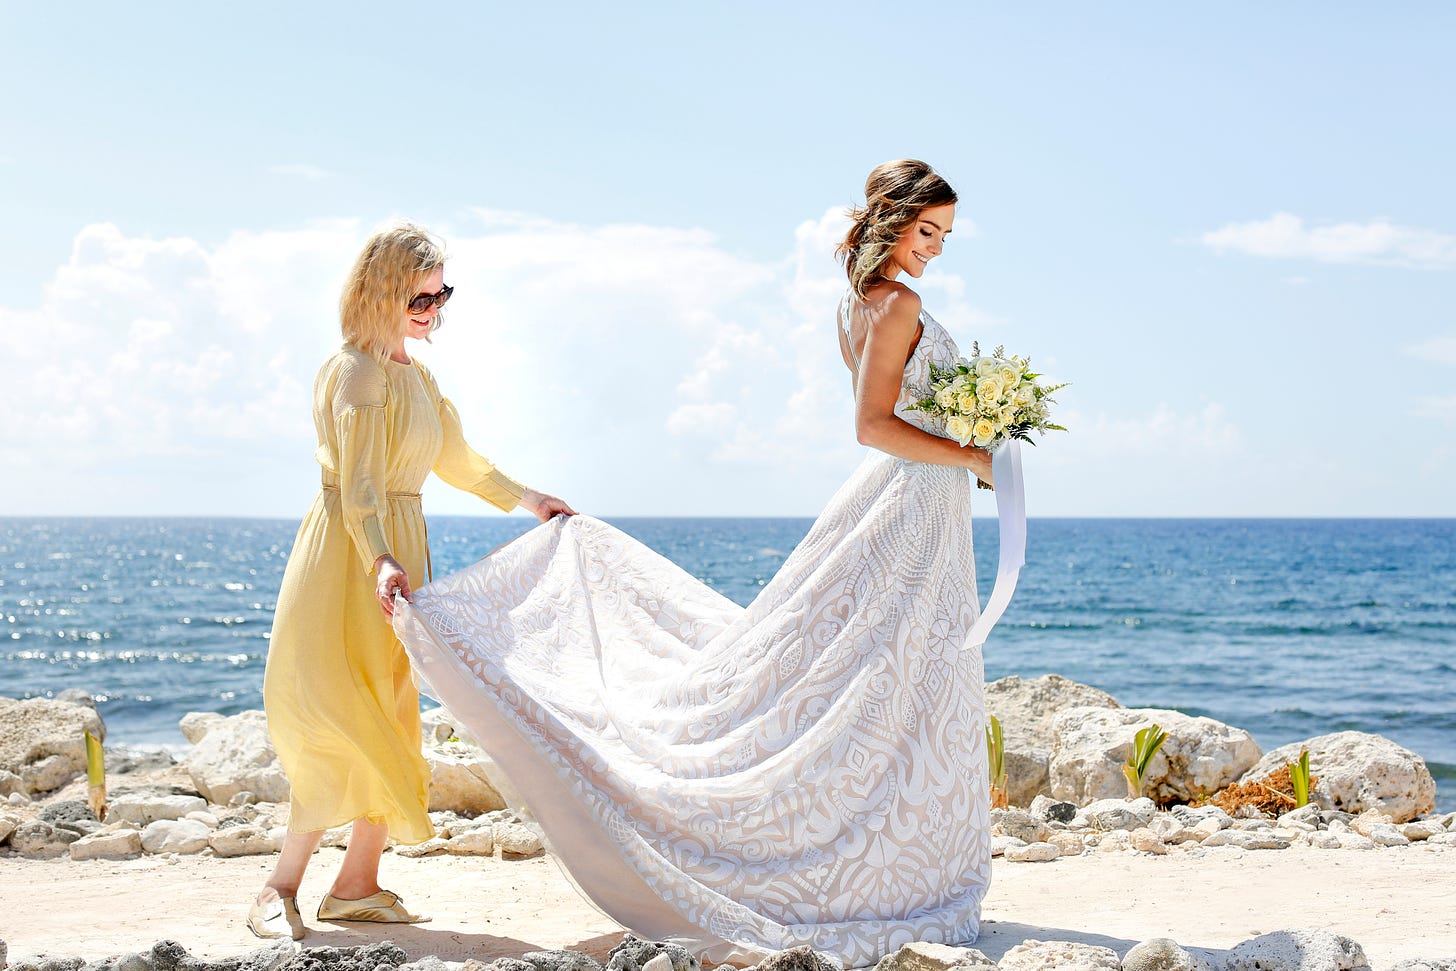 A wedding planner helps a bride with her dress. Two women by the sea at a wedding